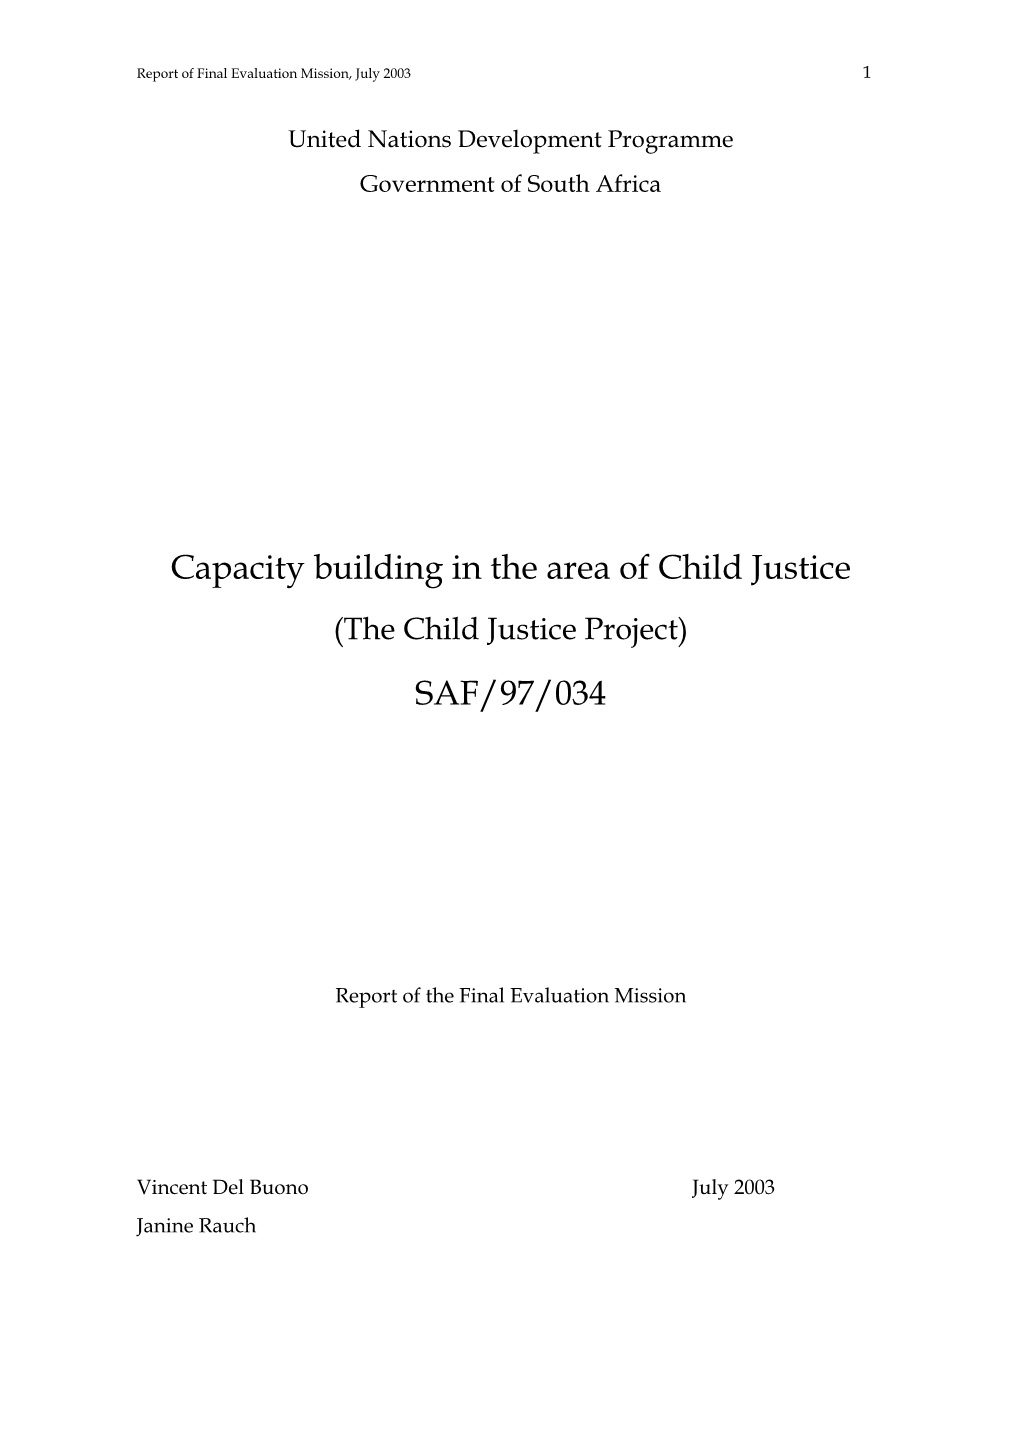 Capacity Building in the Area of Child Justice SAF/97/034